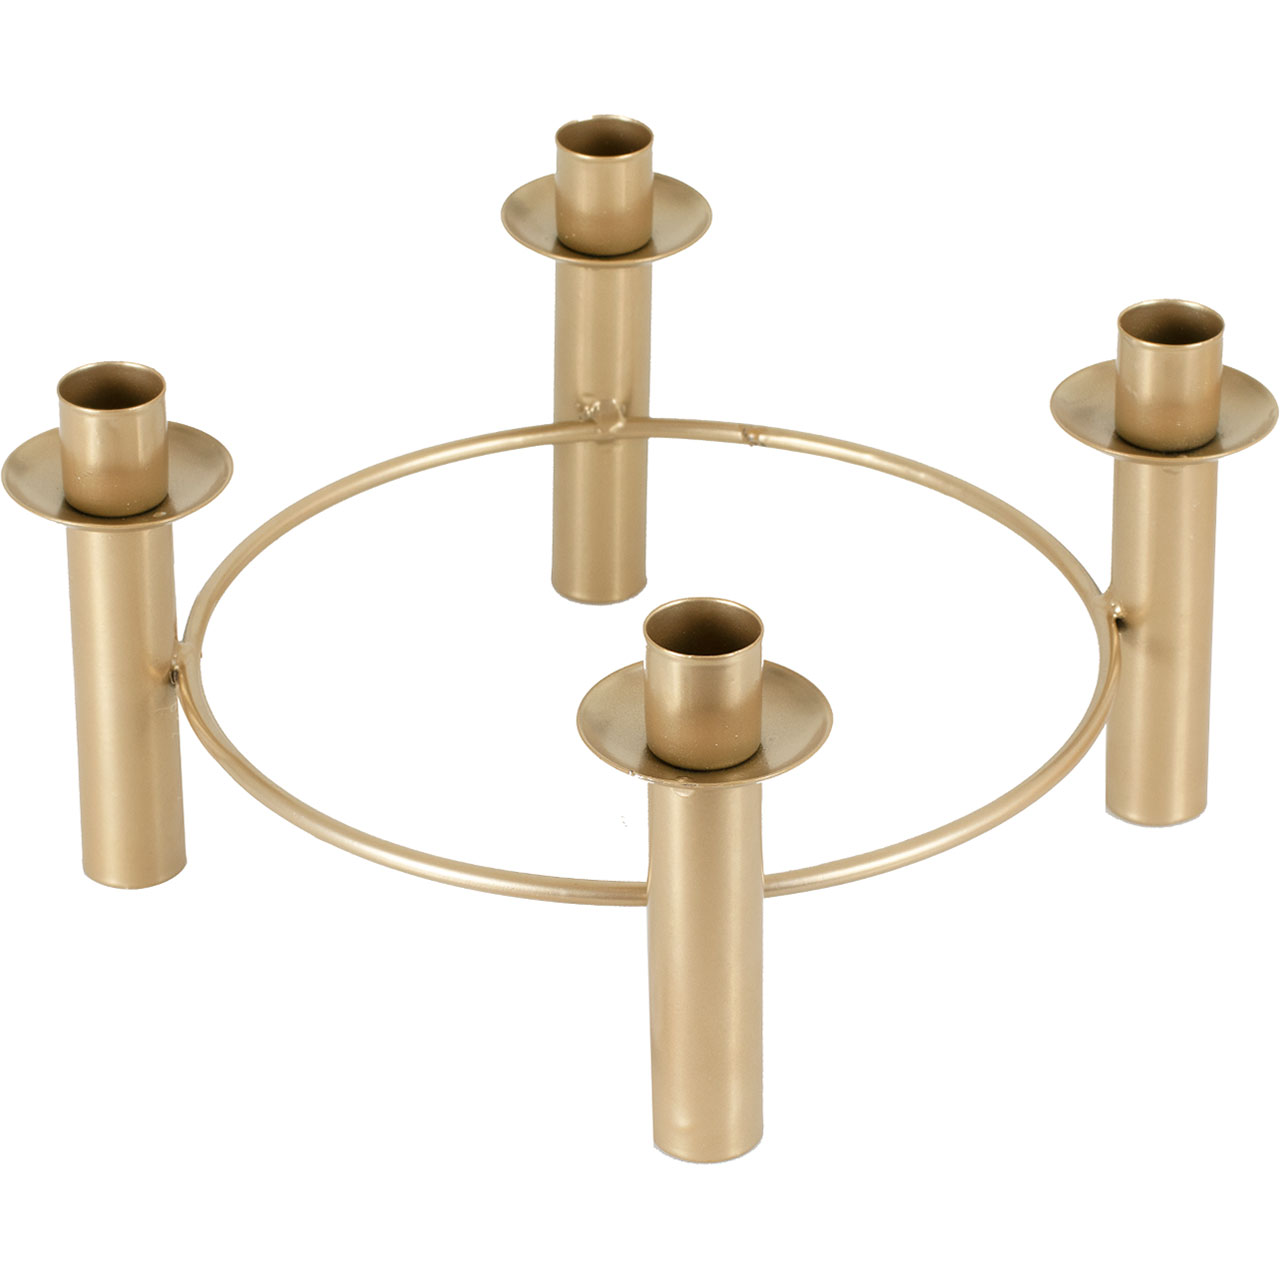 Candle Holder - Gold Centrepiece